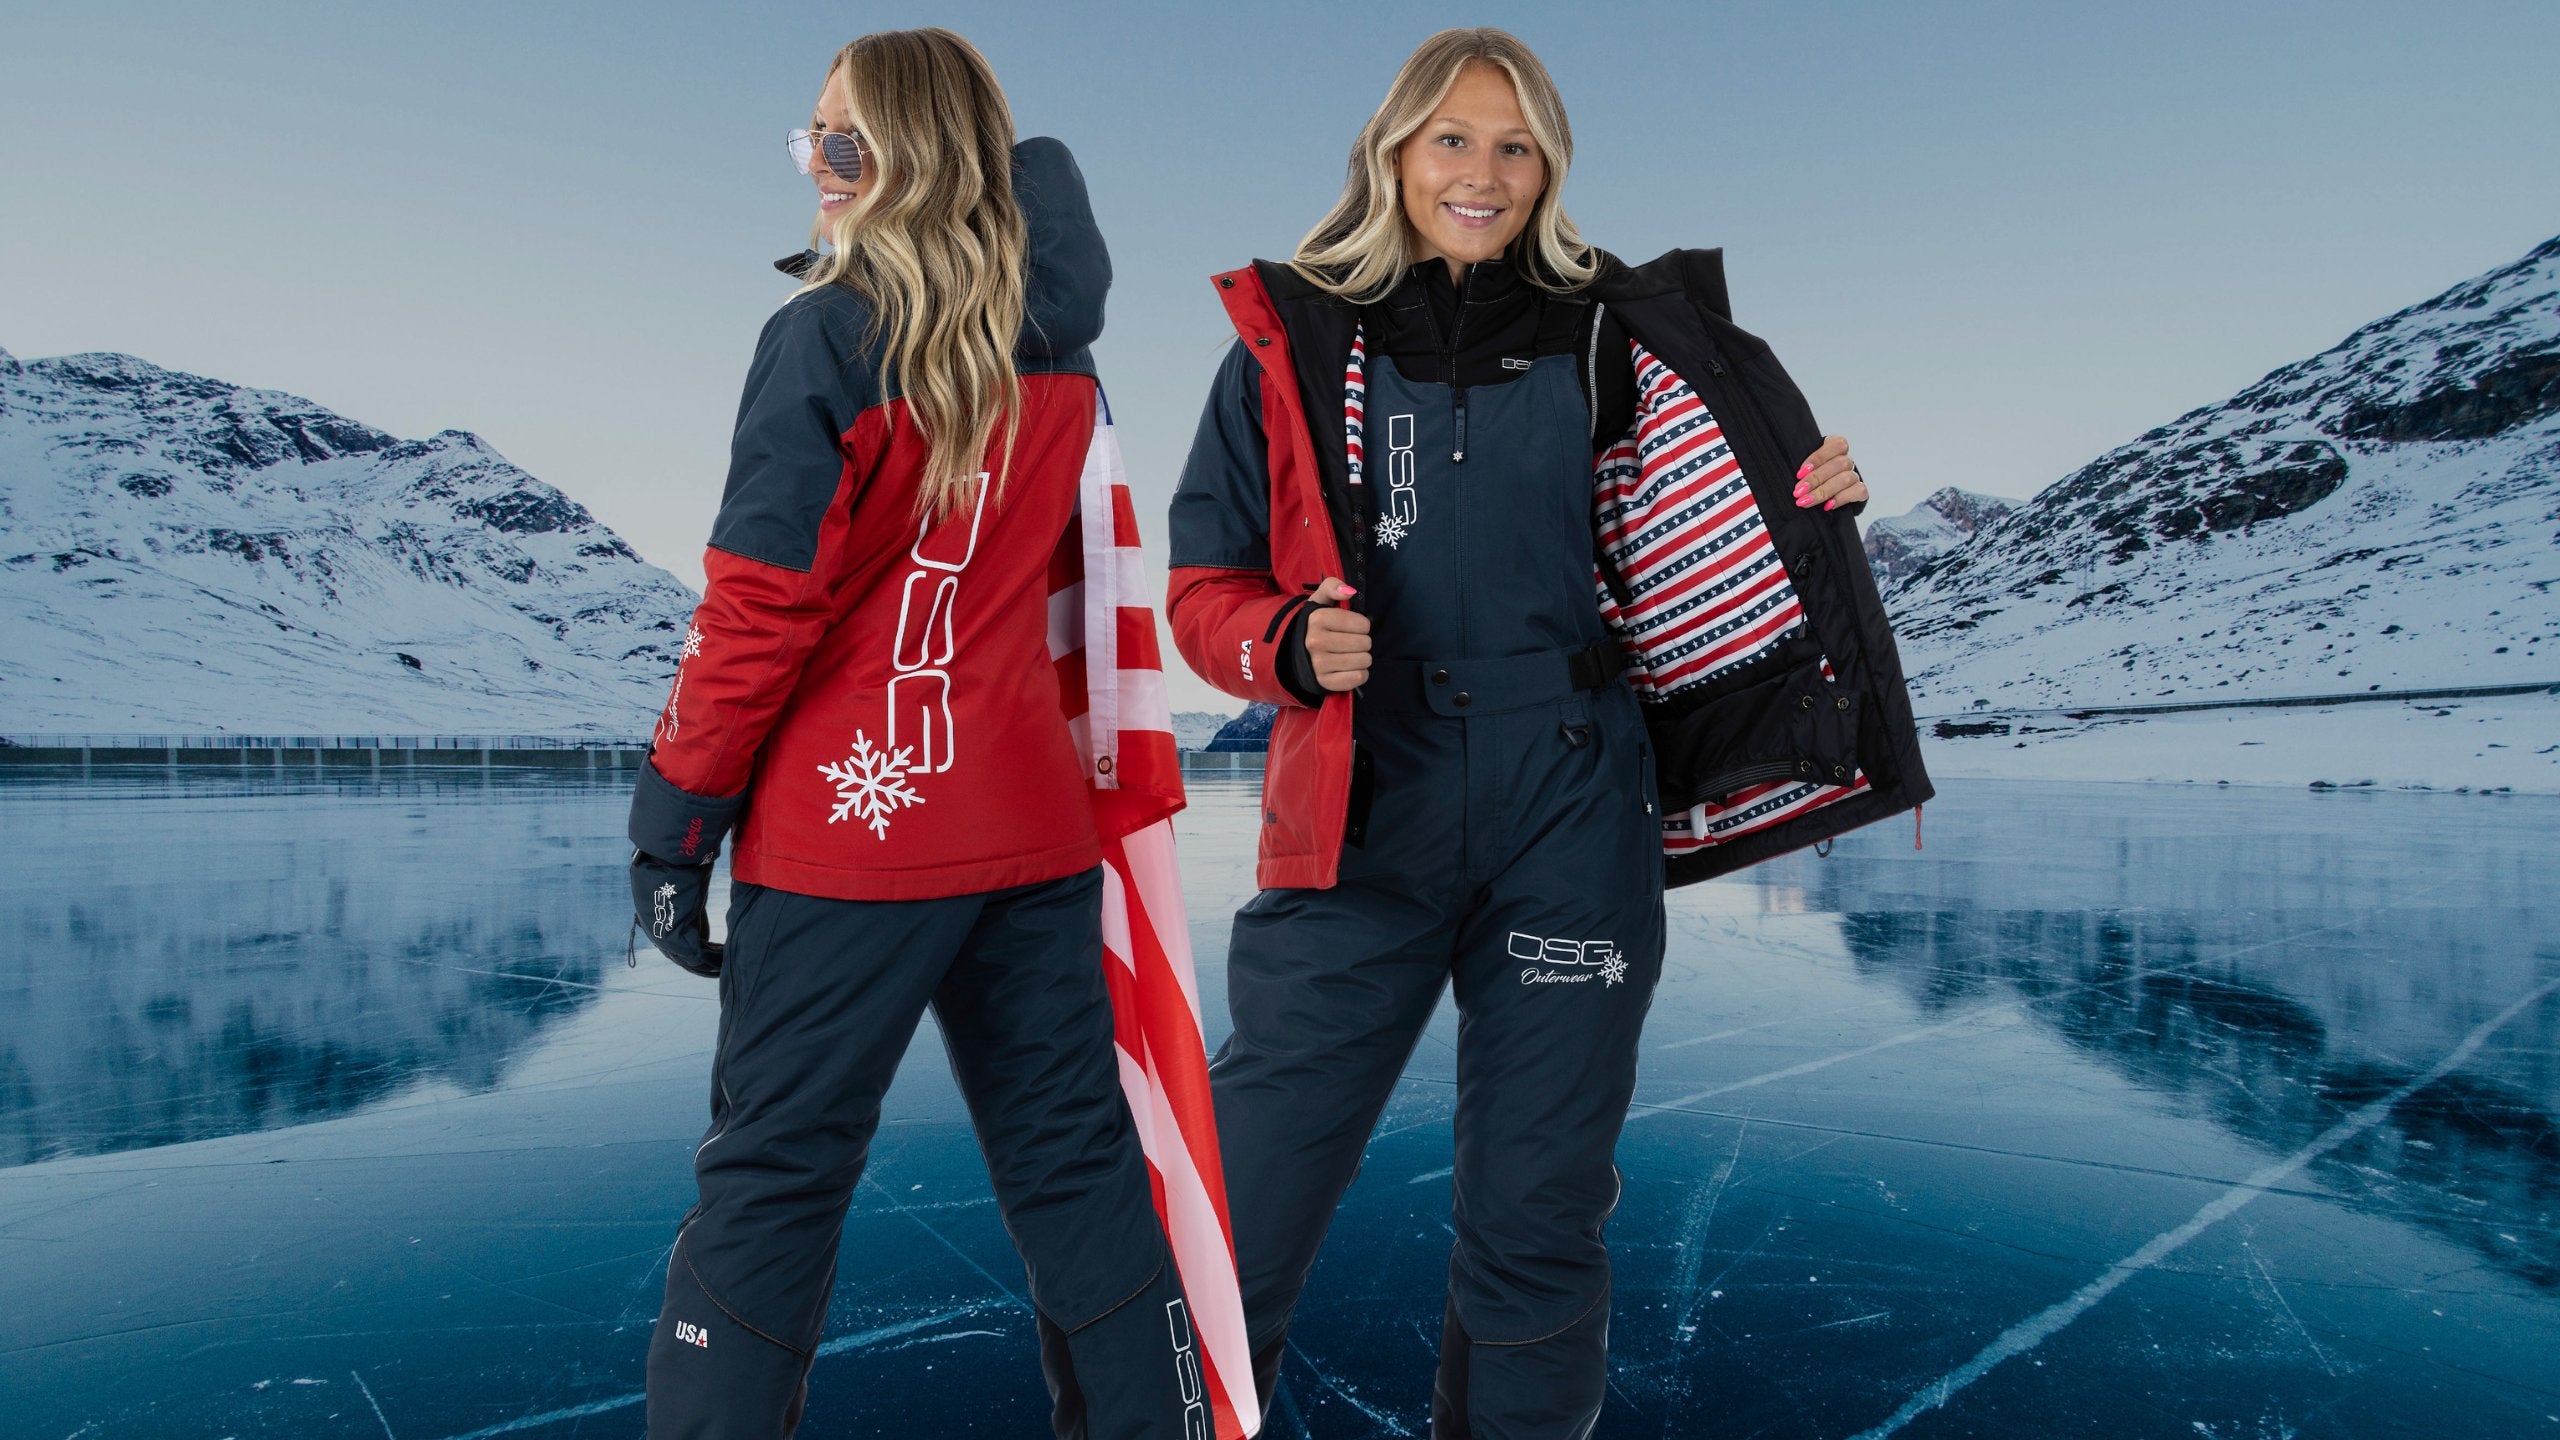 ★Limited Edition 'MERICA Snow Suit Preorder★